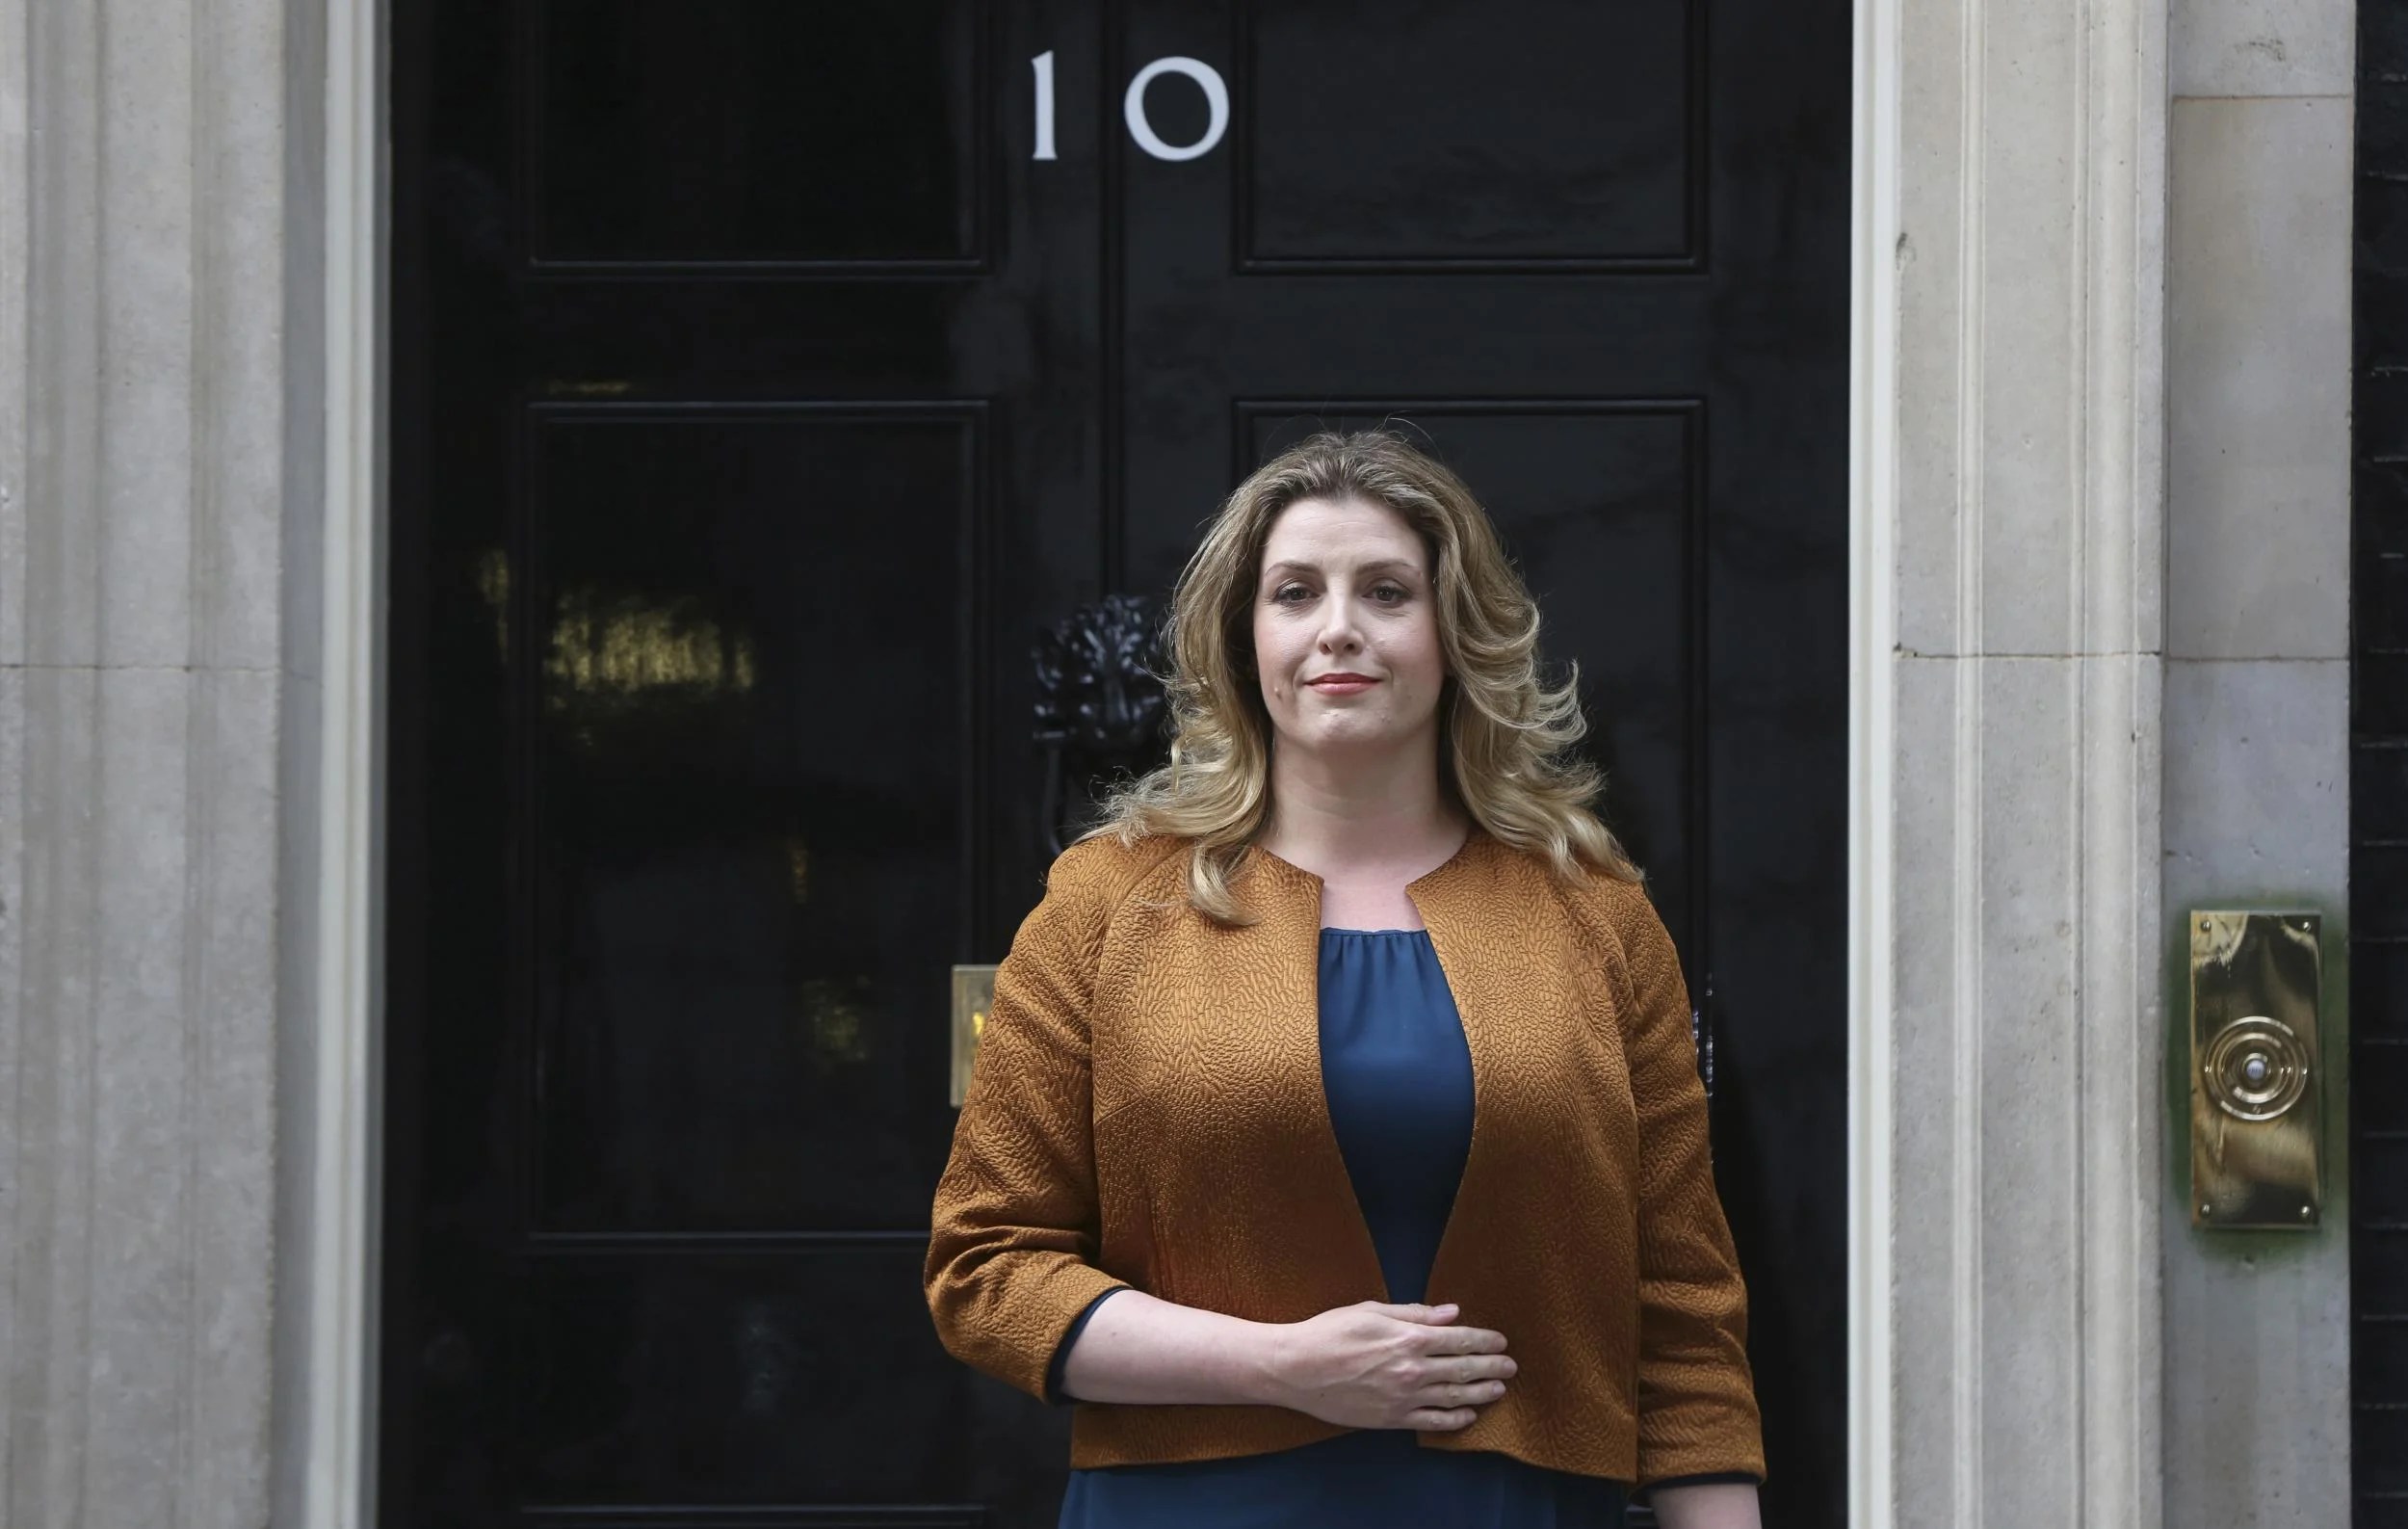 If Penny Mordaunt really believes in aid, she should put funding back